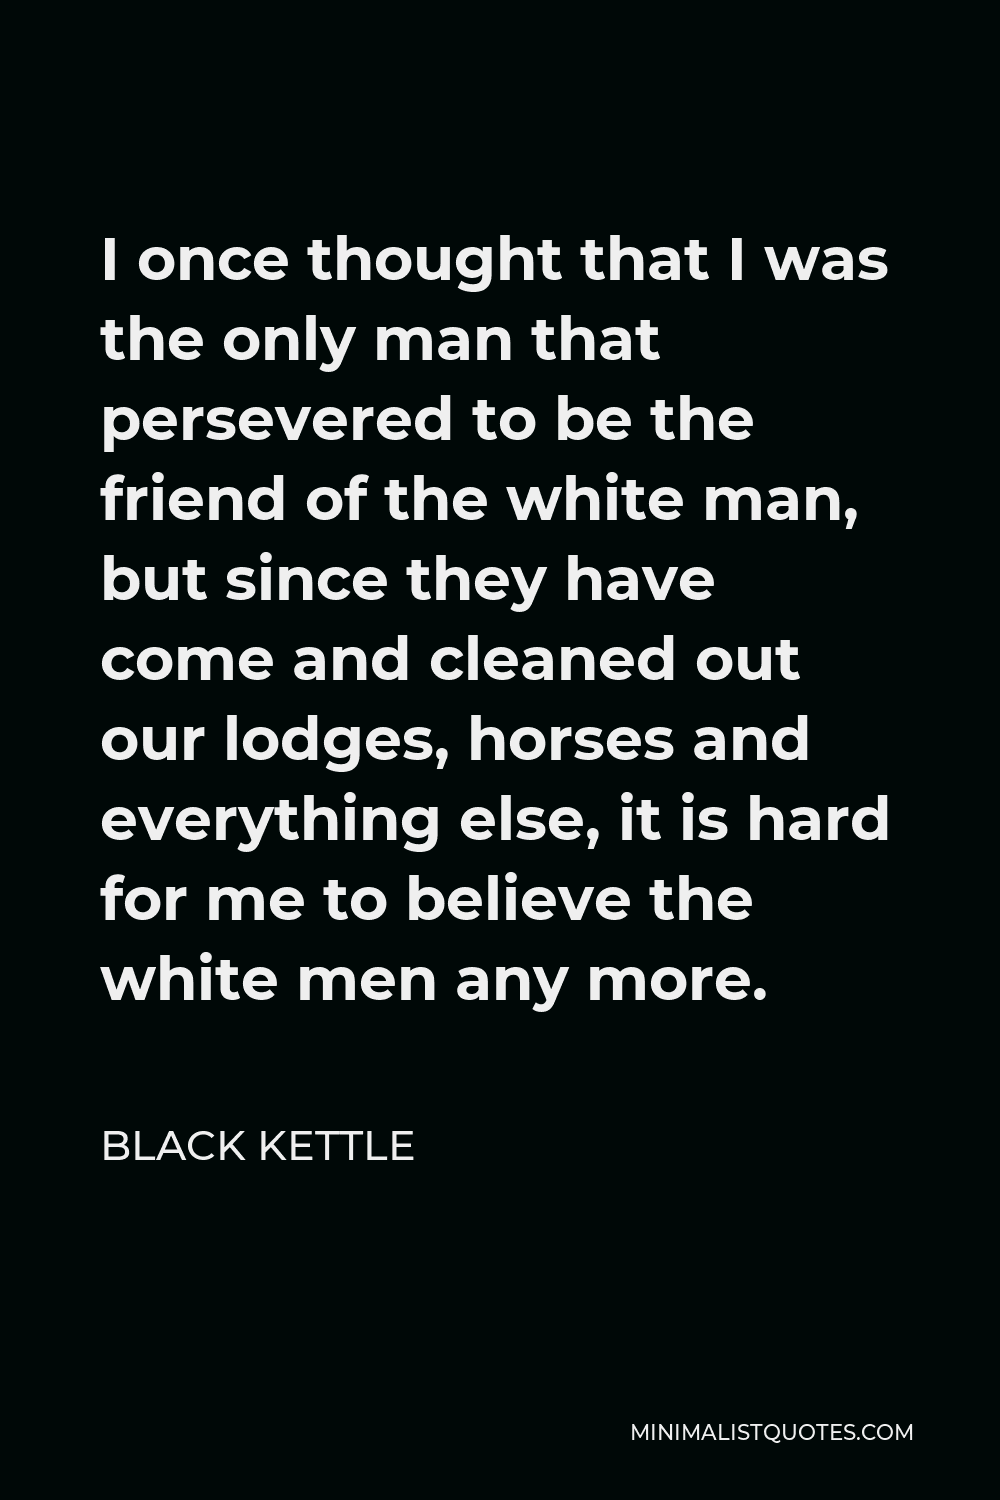 Black Kettle Quote - I once thought that I was the only man that persevered to be the friend of the white man, but since they have come and cleaned out our lodges, horses and everything else, it is hard for me to believe the white men any more.